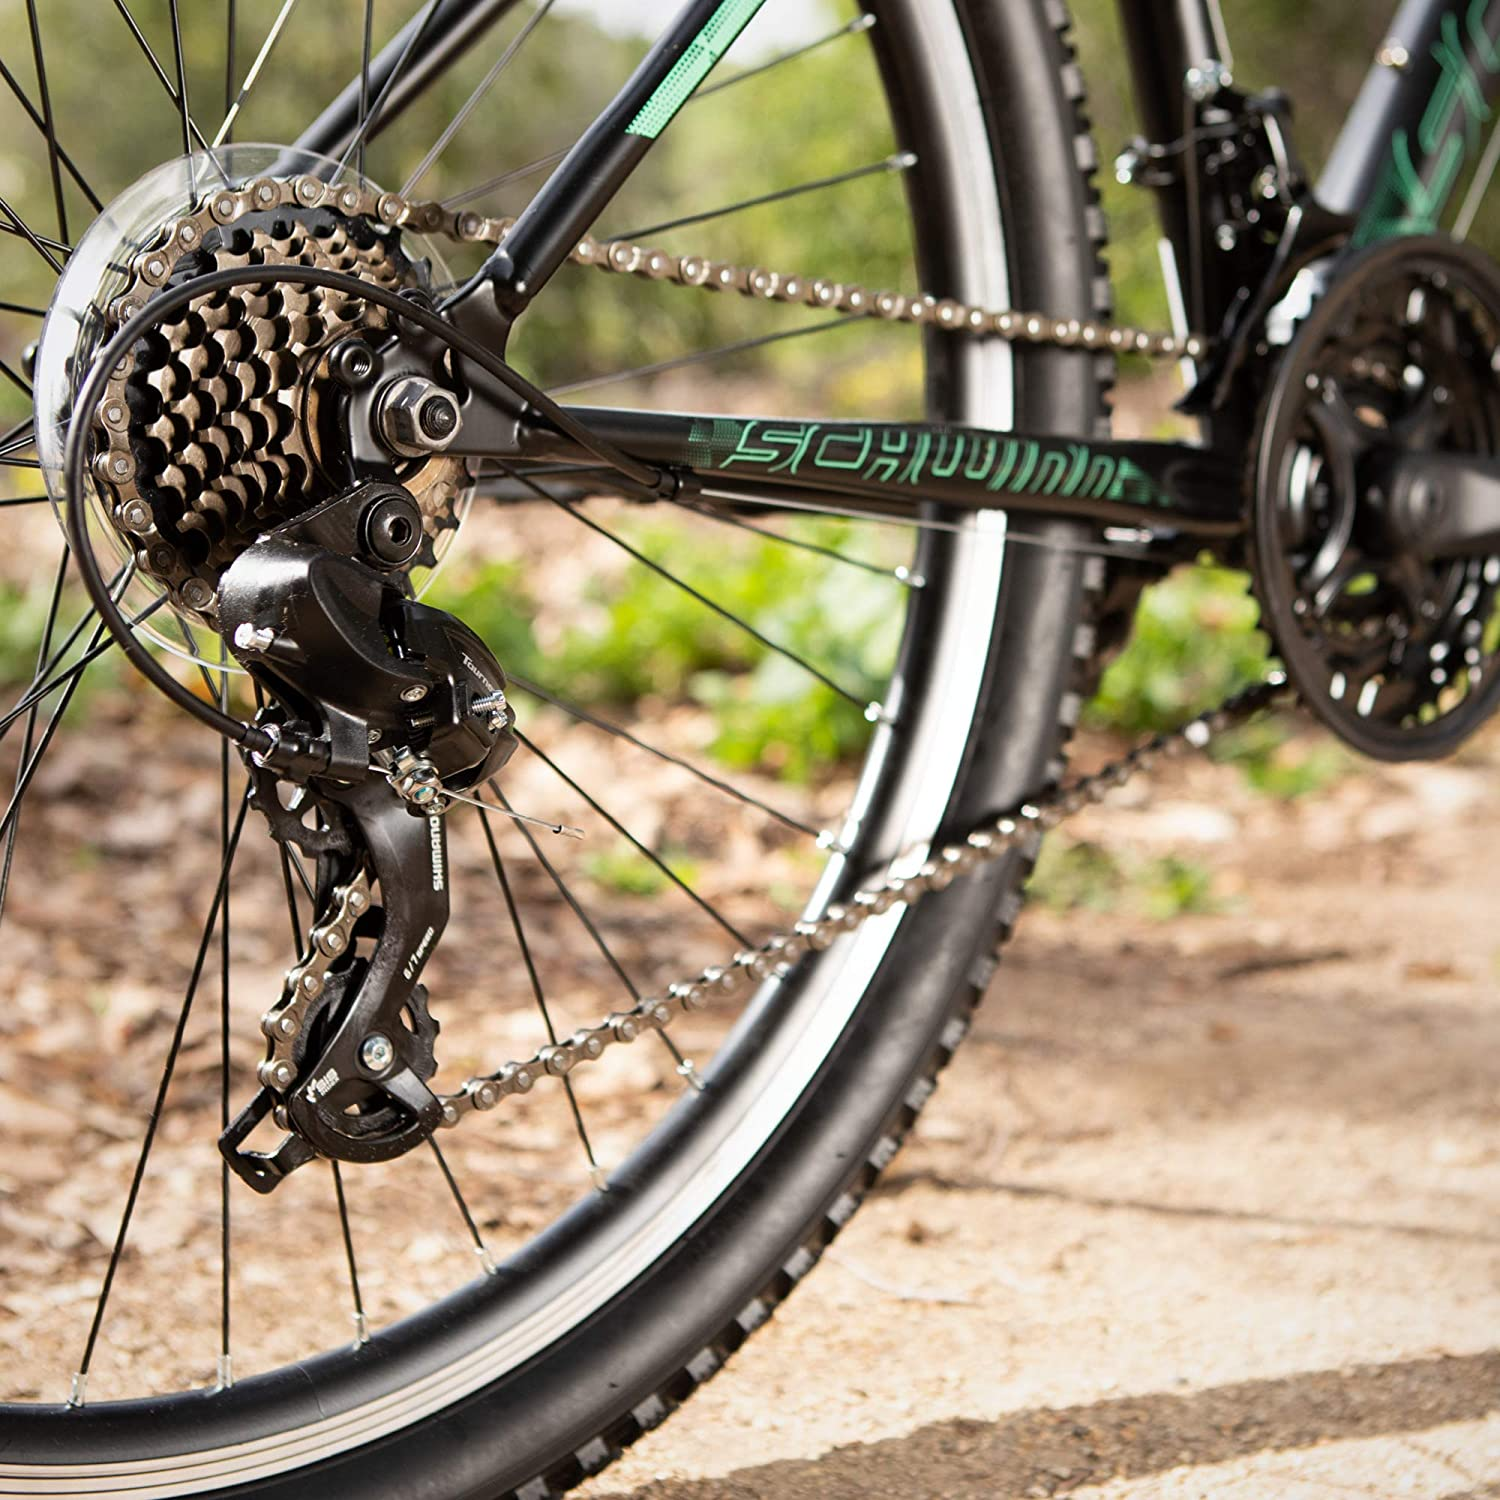 After sizing and fitting your new mountain bike chain, test it to see that the gears shift smoothly and that the drivetrain is working well.